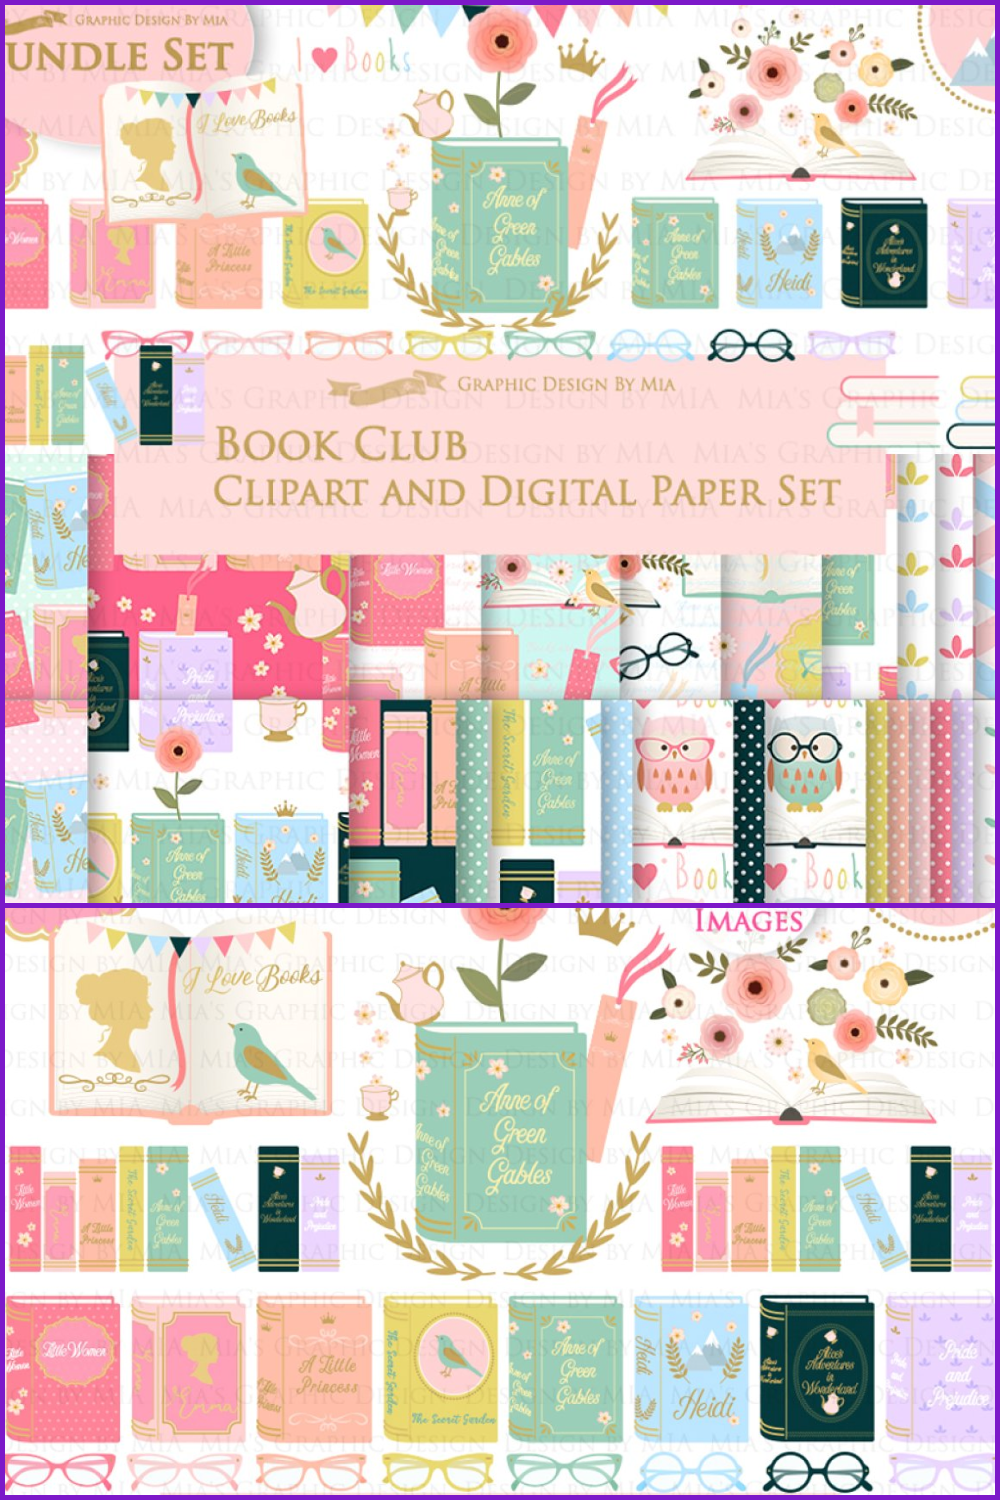 A collage of drawn books with a variety of colorful covers.